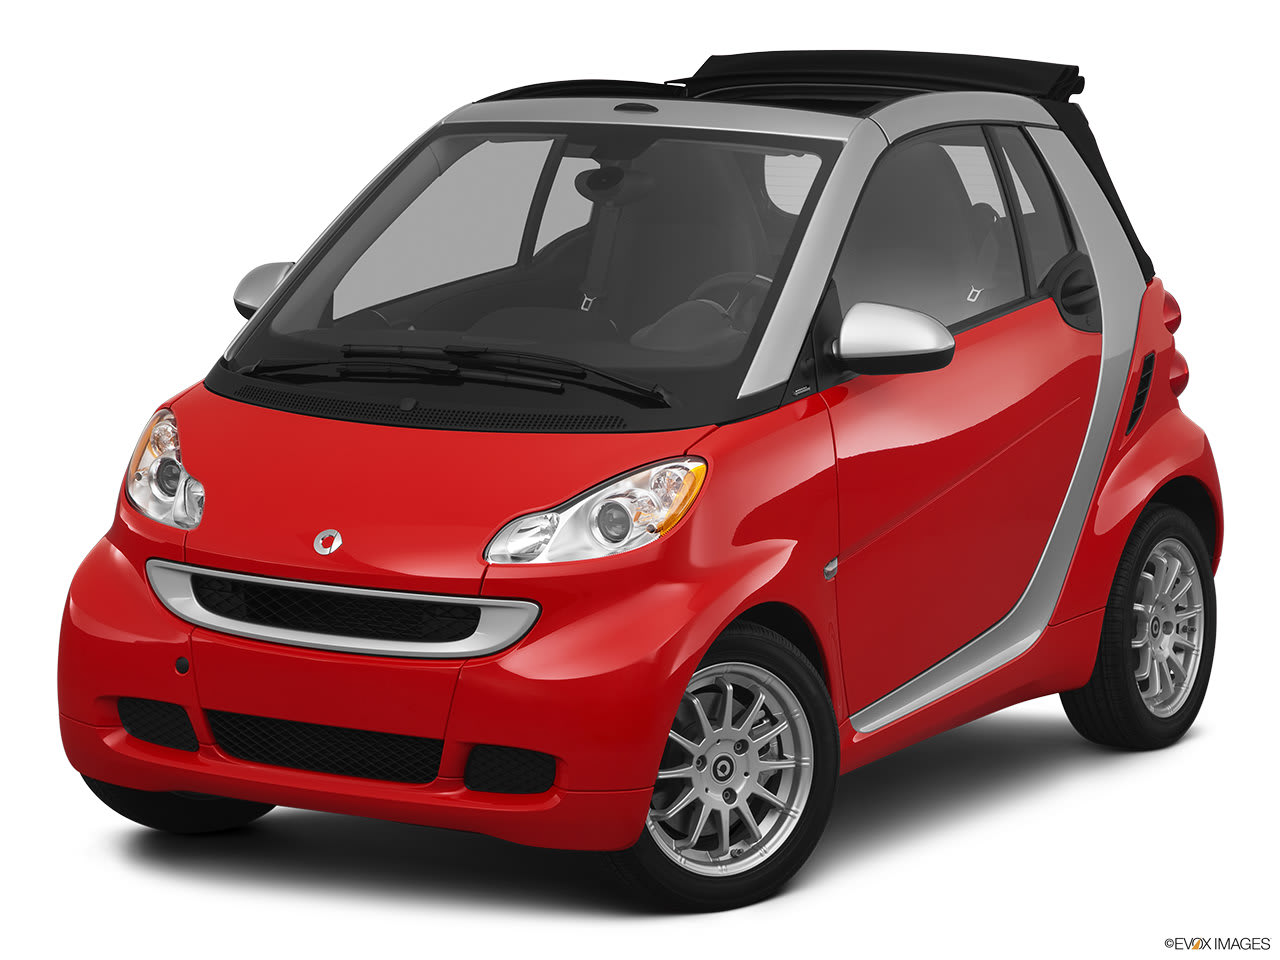 A Buyer's Guide to the 2012 Smart ForTwo